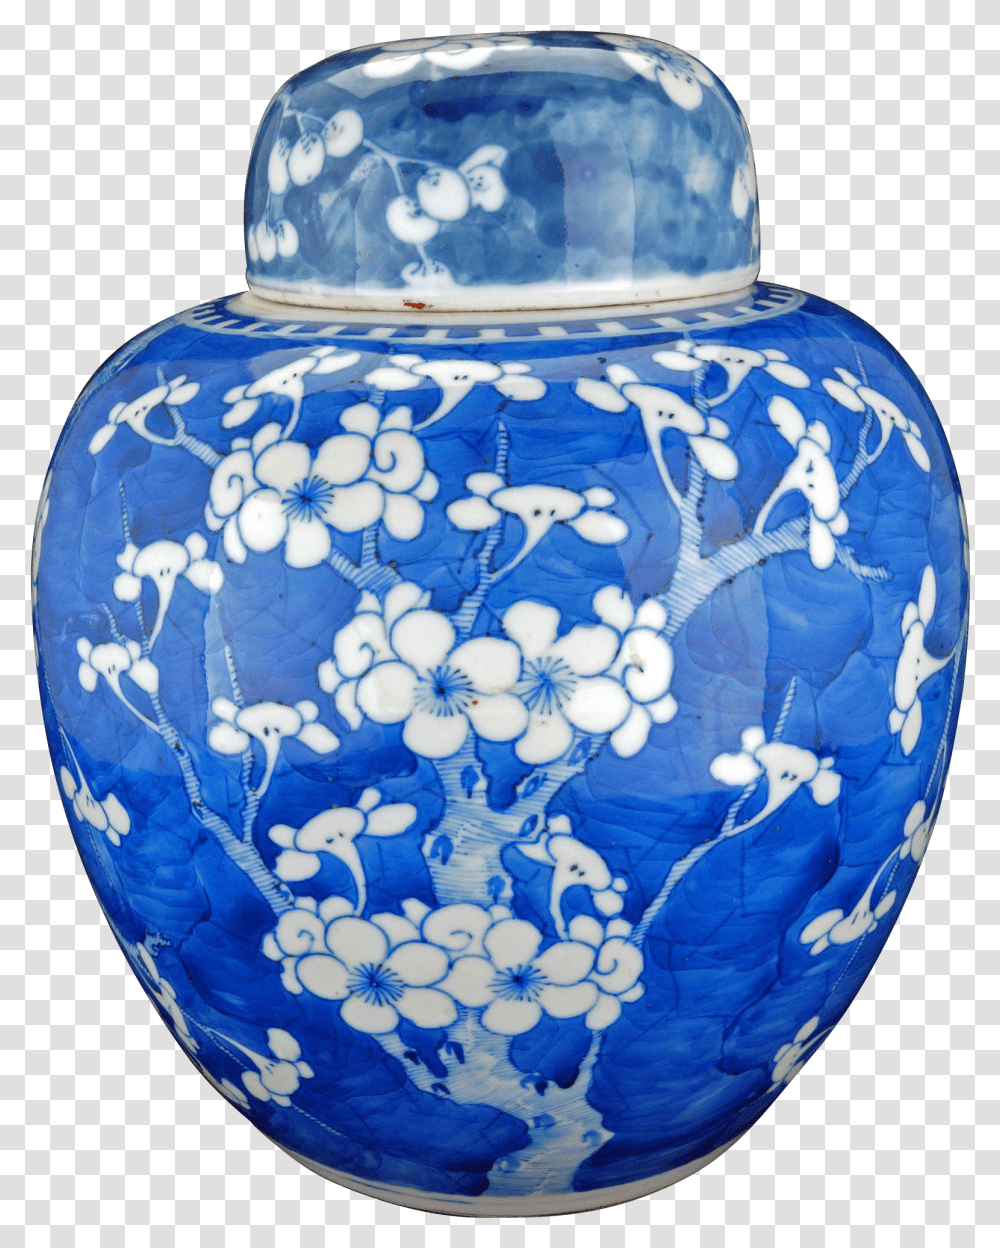 Chinese Porcelain Blue And White Ginger Jar Transparent Png